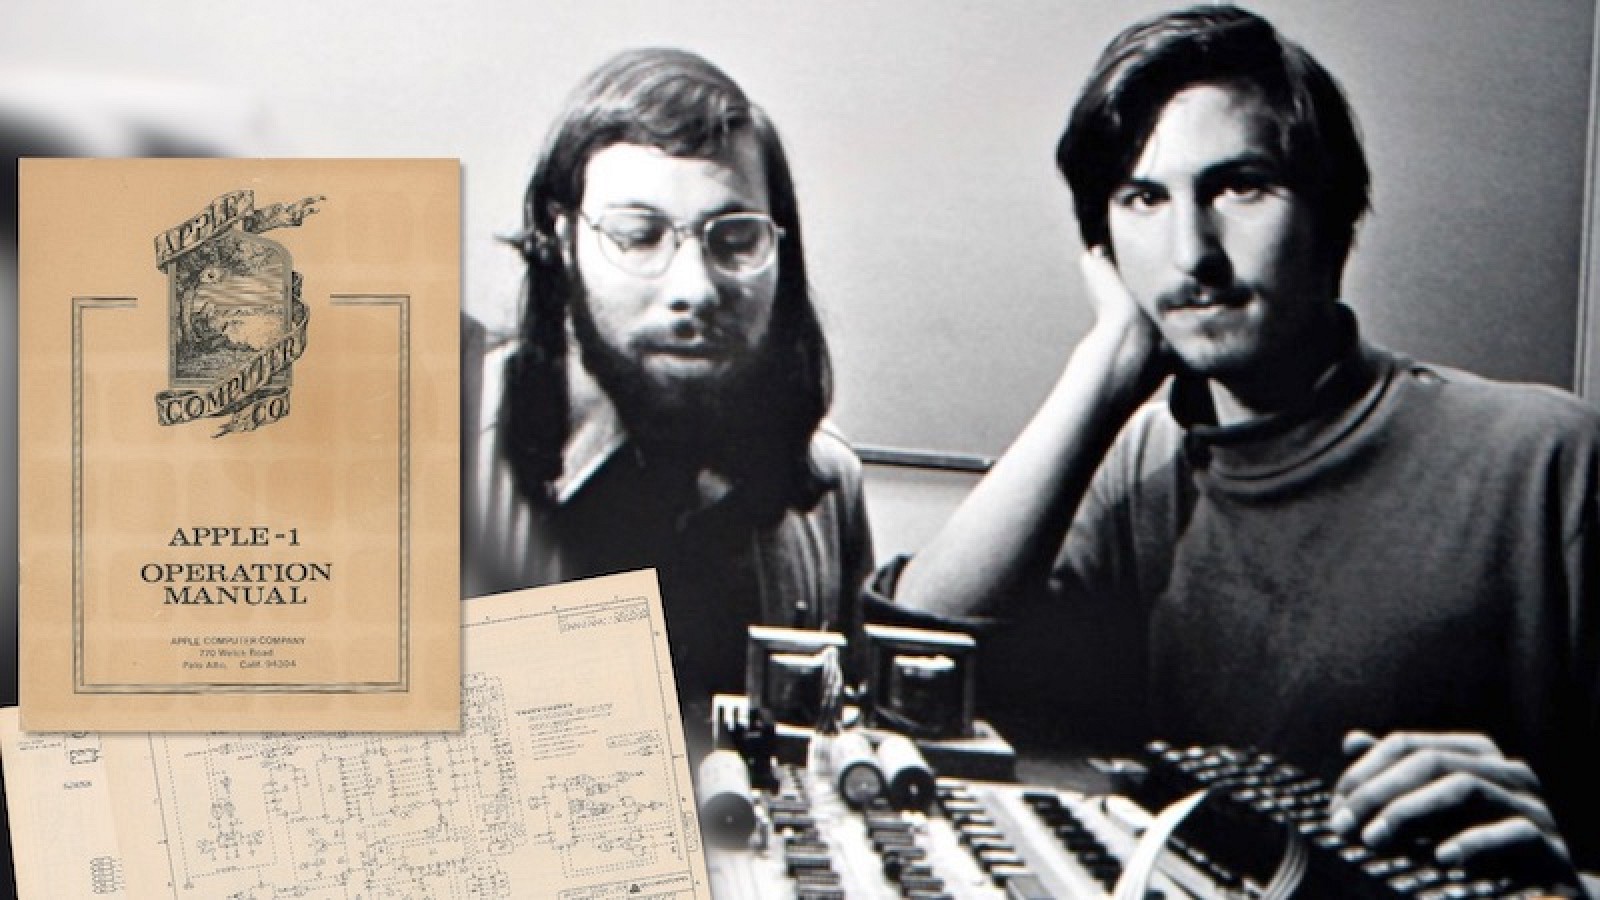 Bidding on 'Extremely Rare' Apple I Manual From 1976 Reaches Nearly $10,000 at Auction